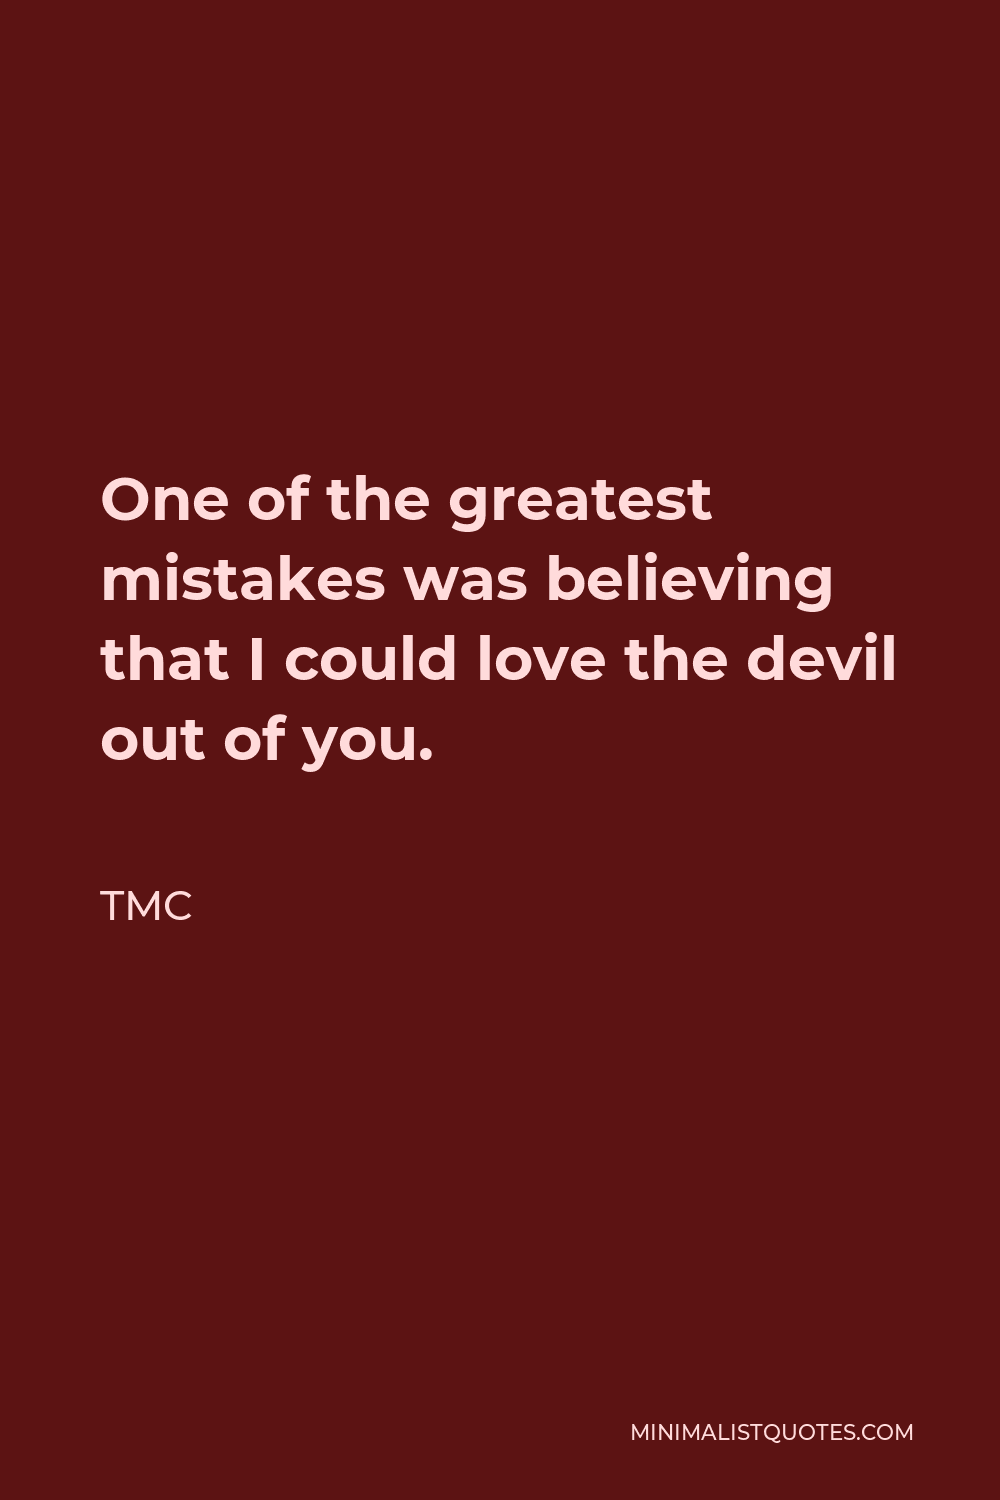 TMC Quote - One of the greatest mistakes was believing that I could love the devil out of you.